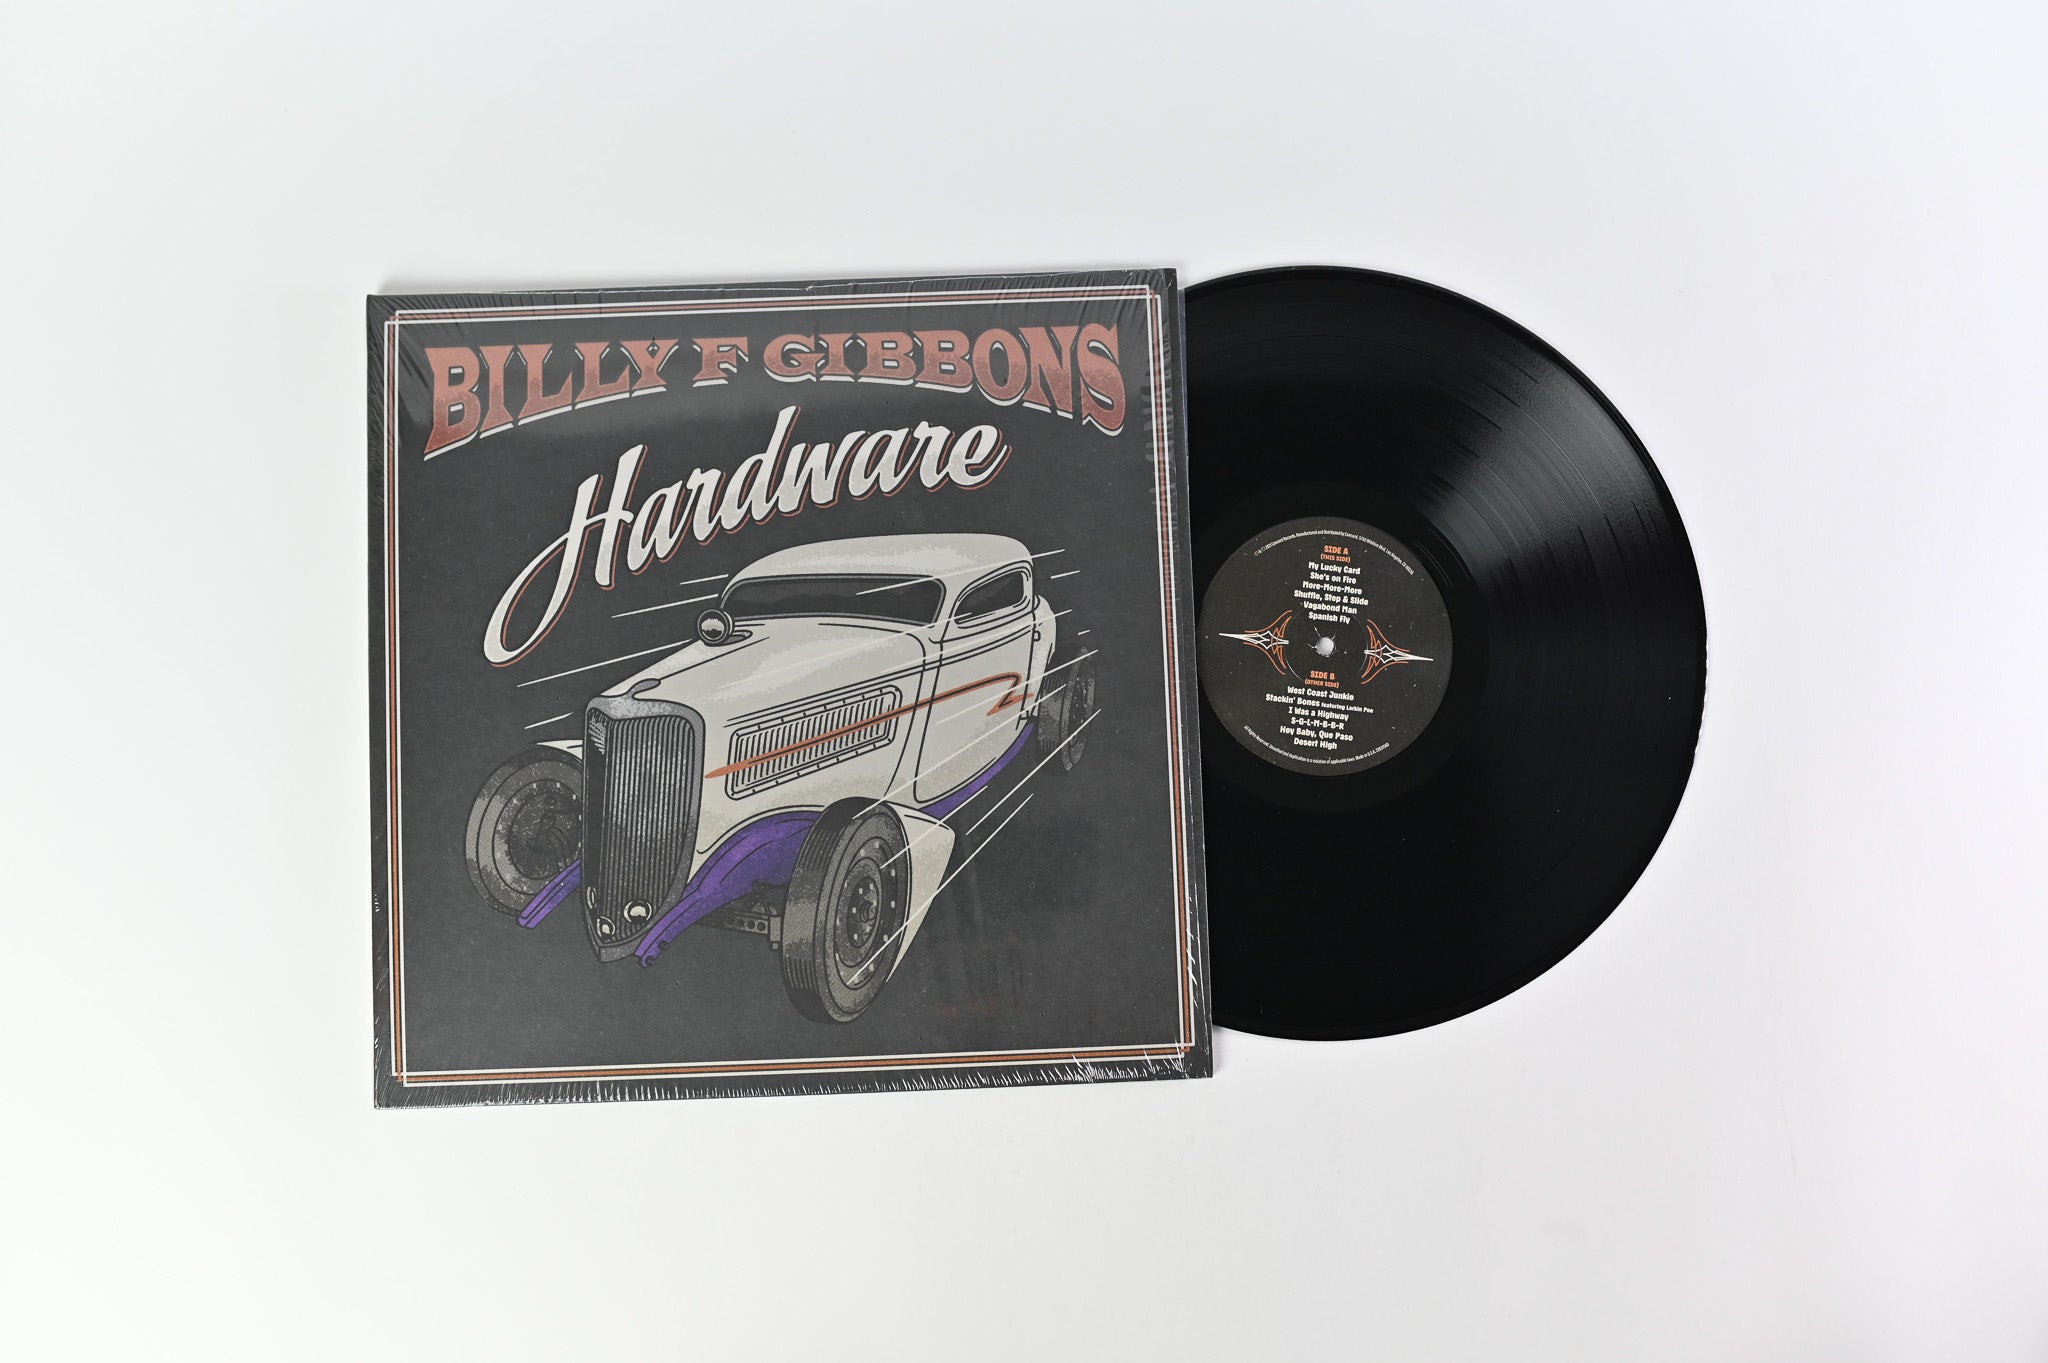 Billy F. Gibbons - Hardware on Concord Records